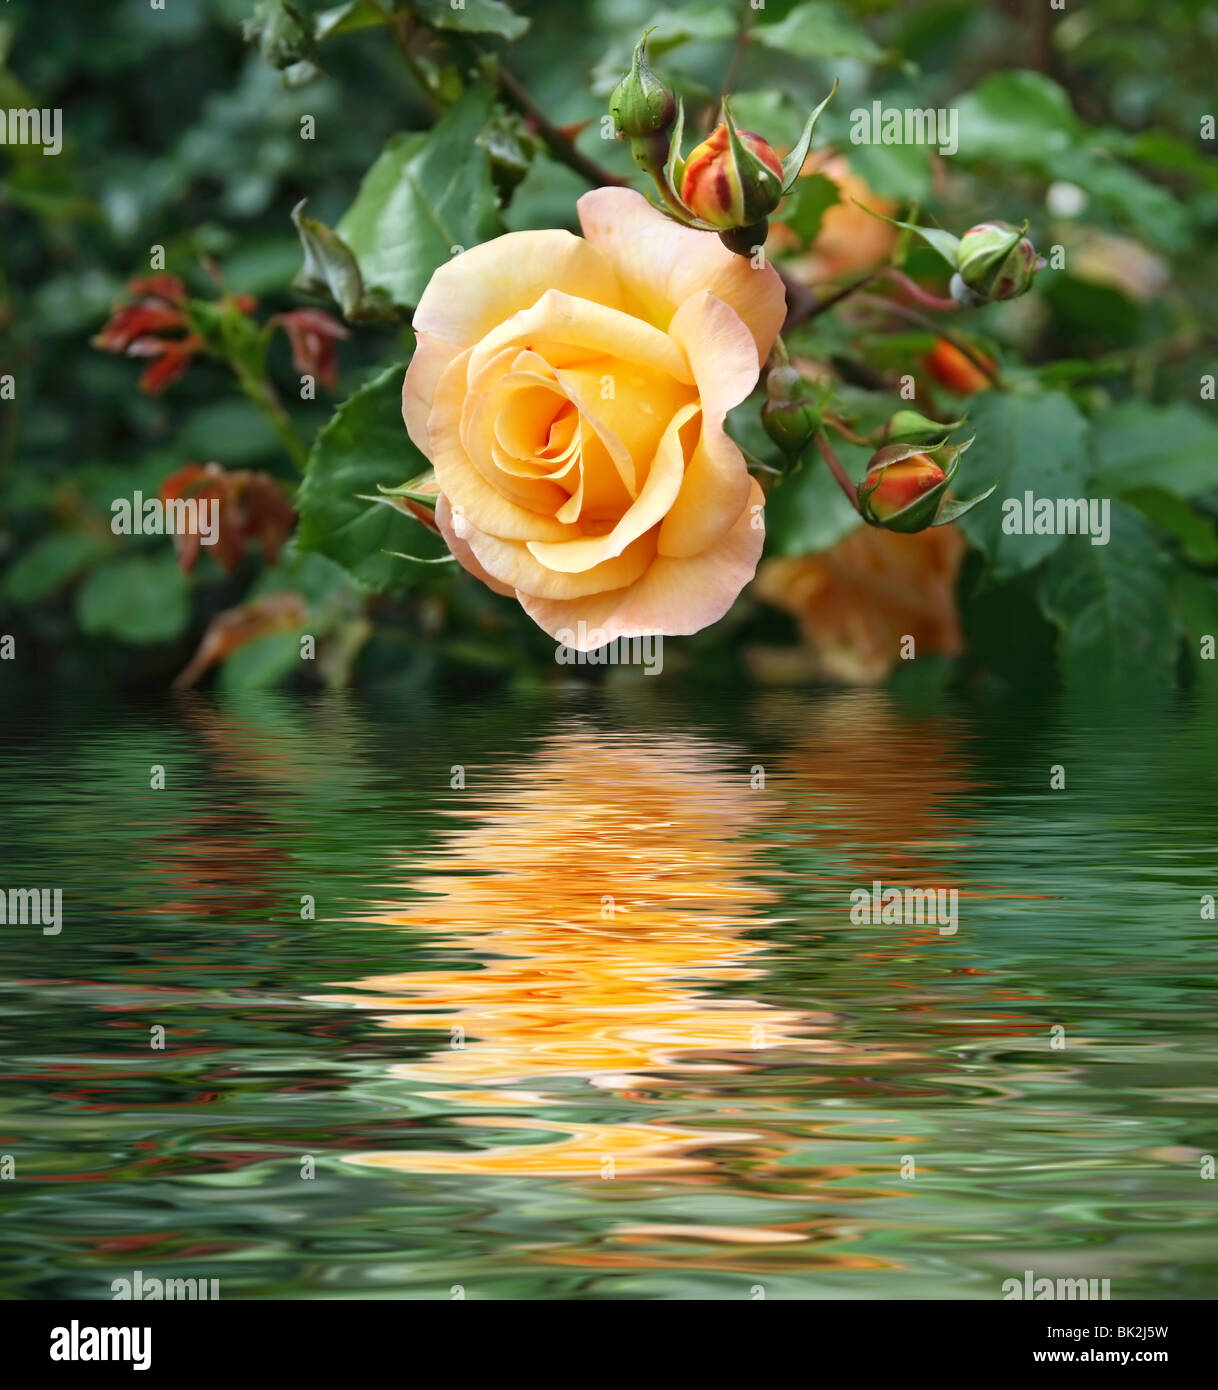 yellow rose between buds and foliage is reflected on water Stock Photo